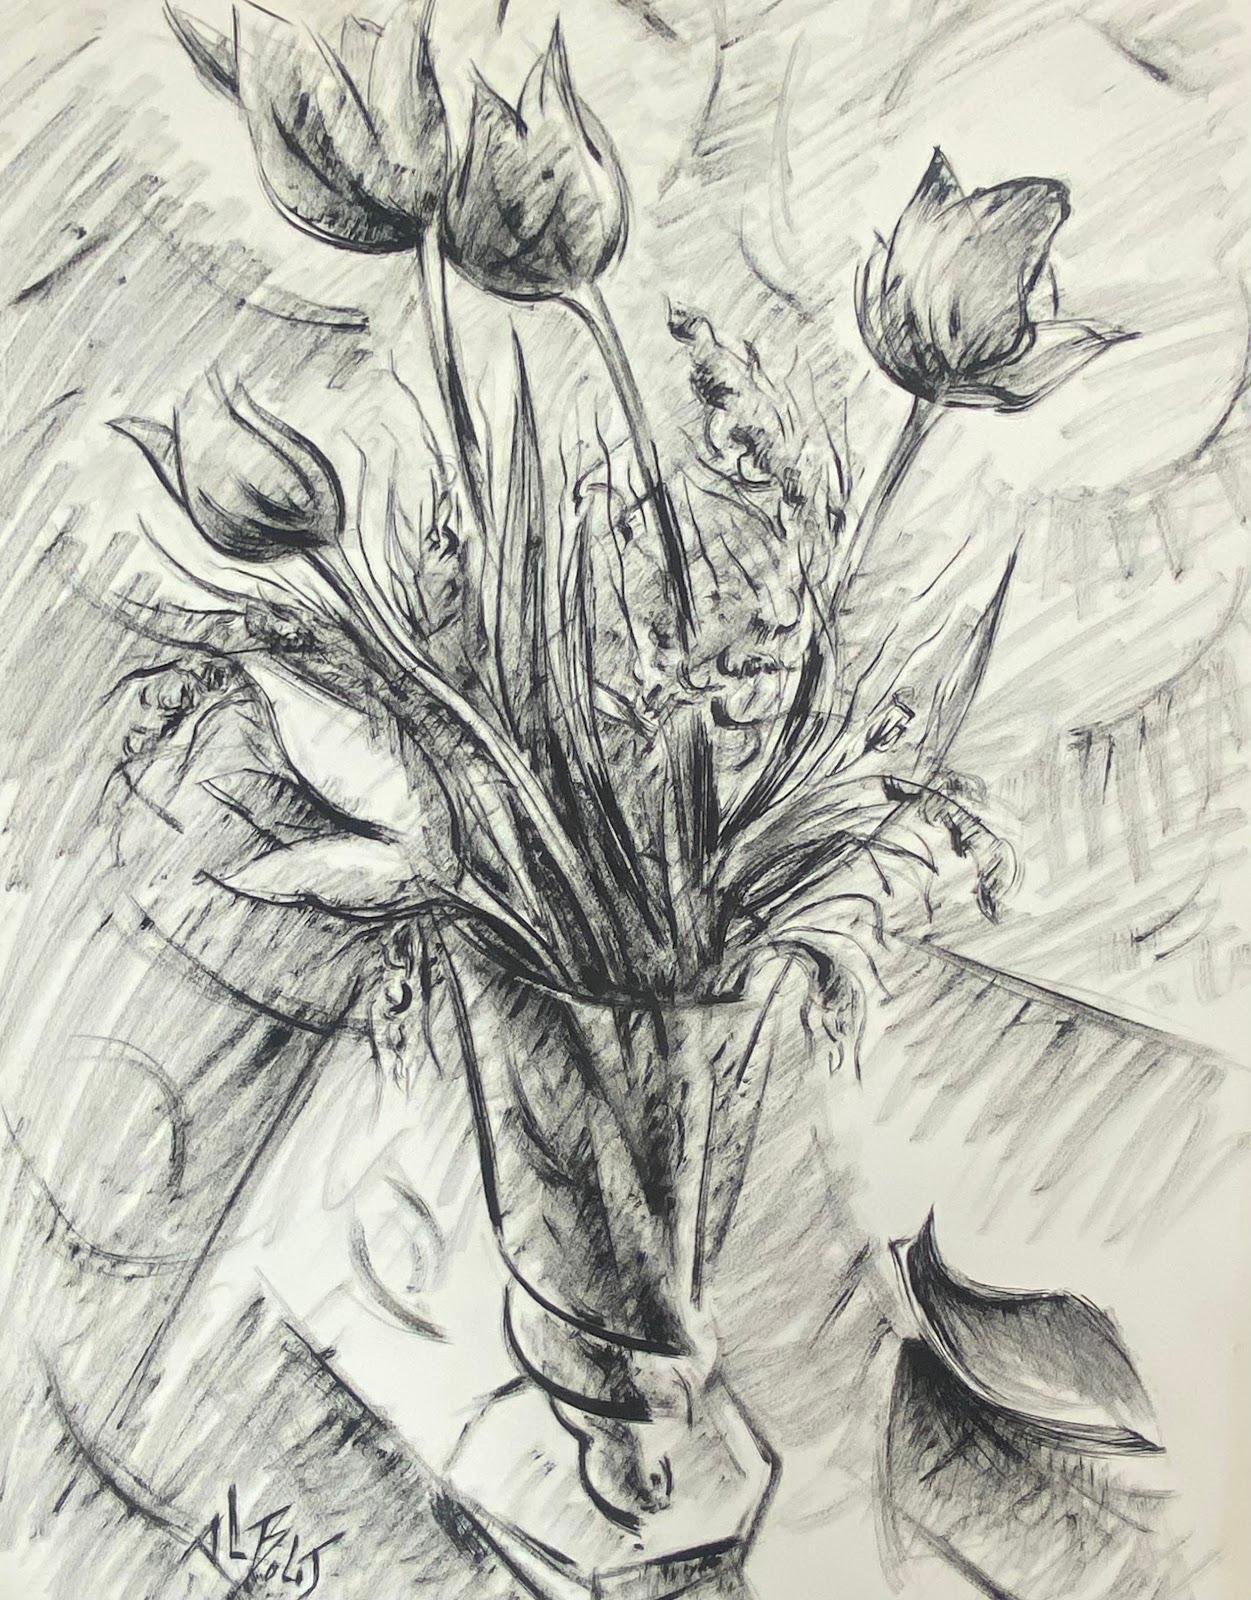 Paul-Louis Bolot (French 1918-2003) Figurative Painting - 20th Century French Modernist Monochrome Painting Of Tulips In A Vase 